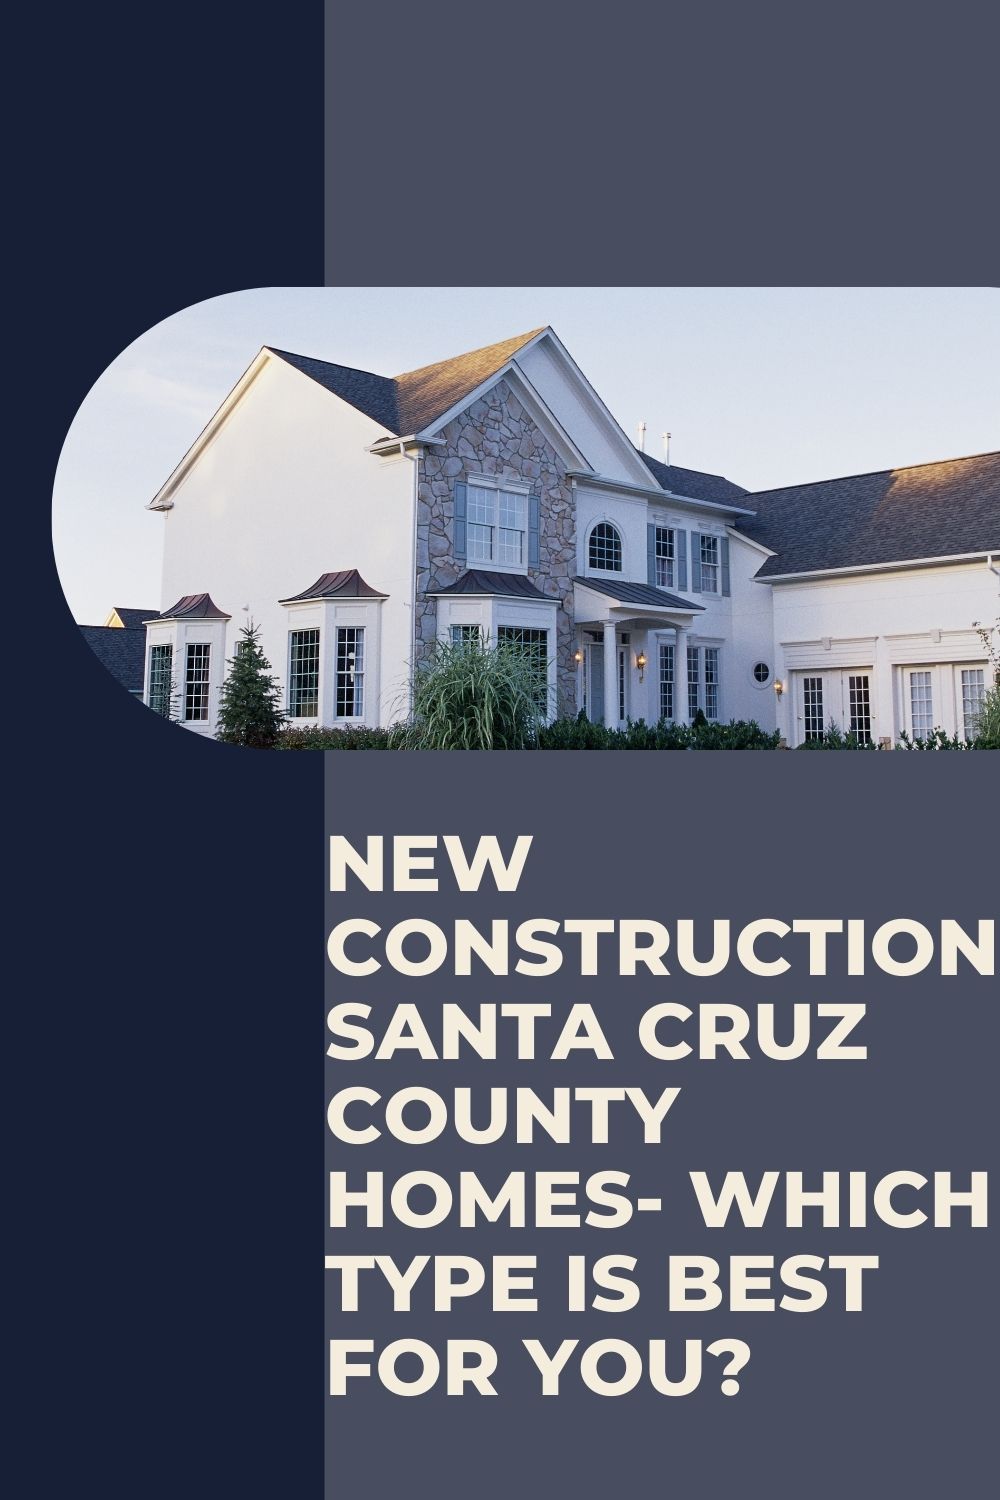 New Construction Santa Cruz County Homes- Which Type is best for You?